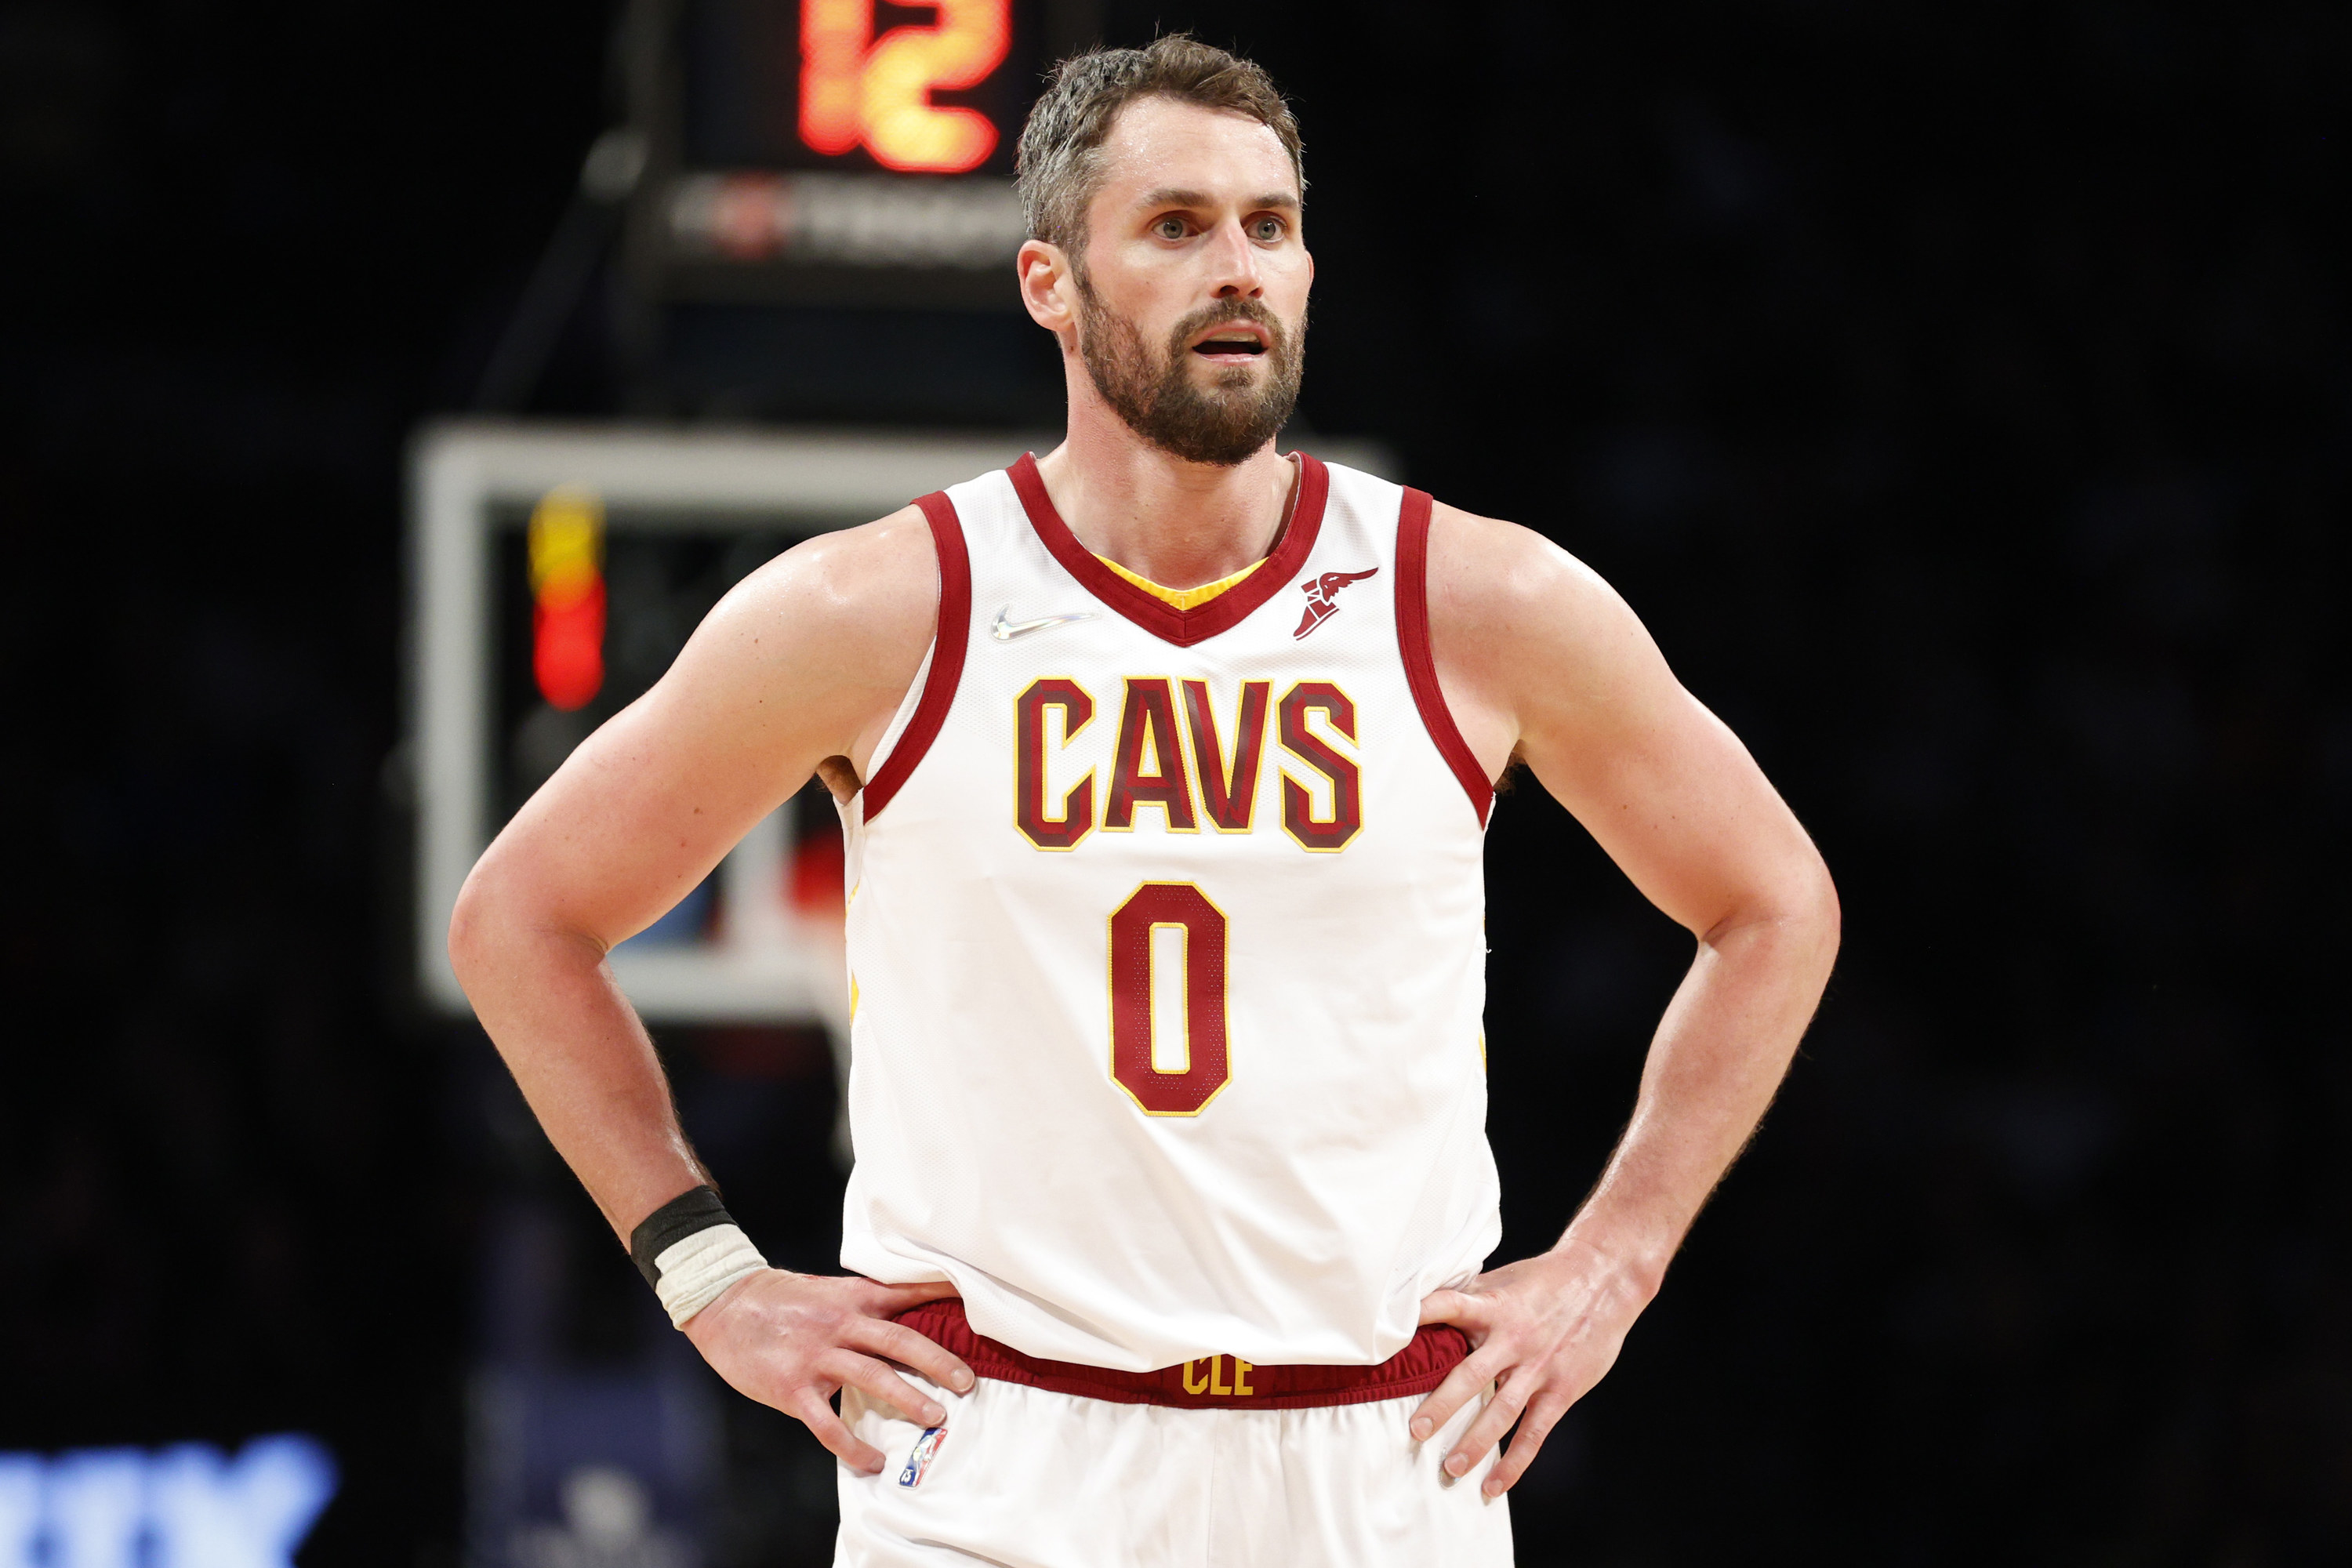 Kevin Love #0 of the Cleveland Cavaliers looks on during the second half against the Brooklyn Nets at Barclays Center